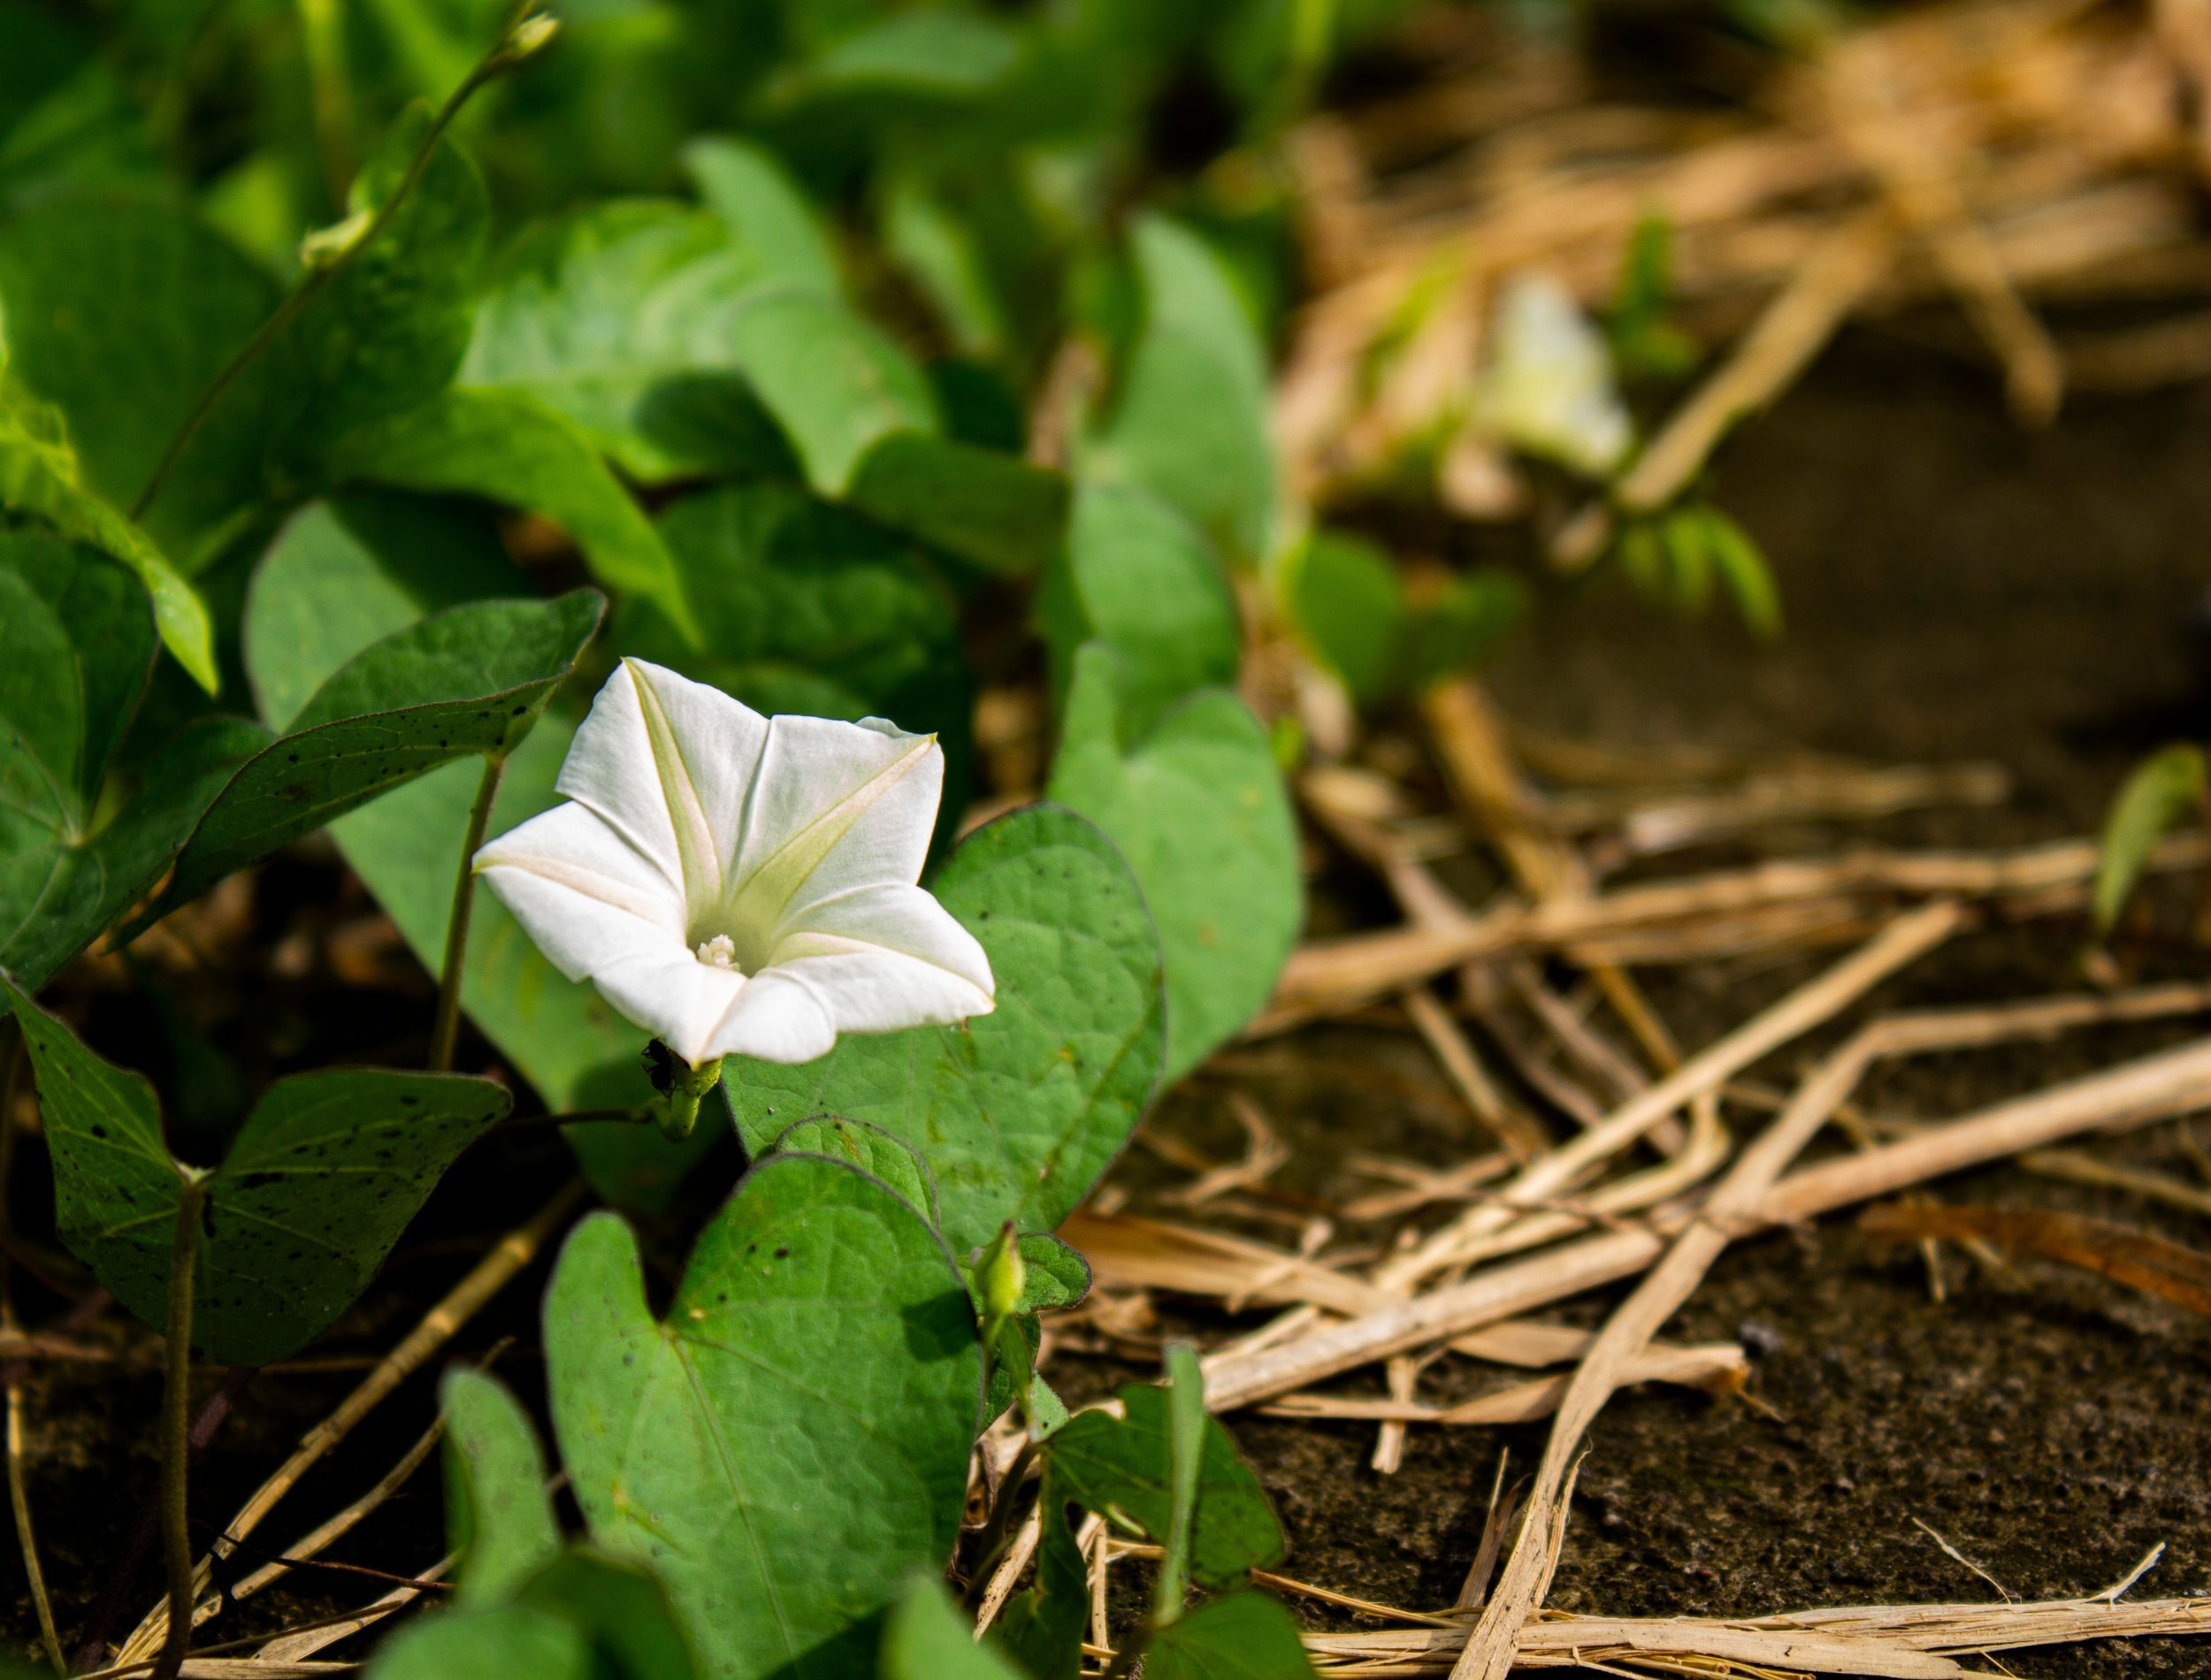 How to Grow Exquisite Moon Flowers